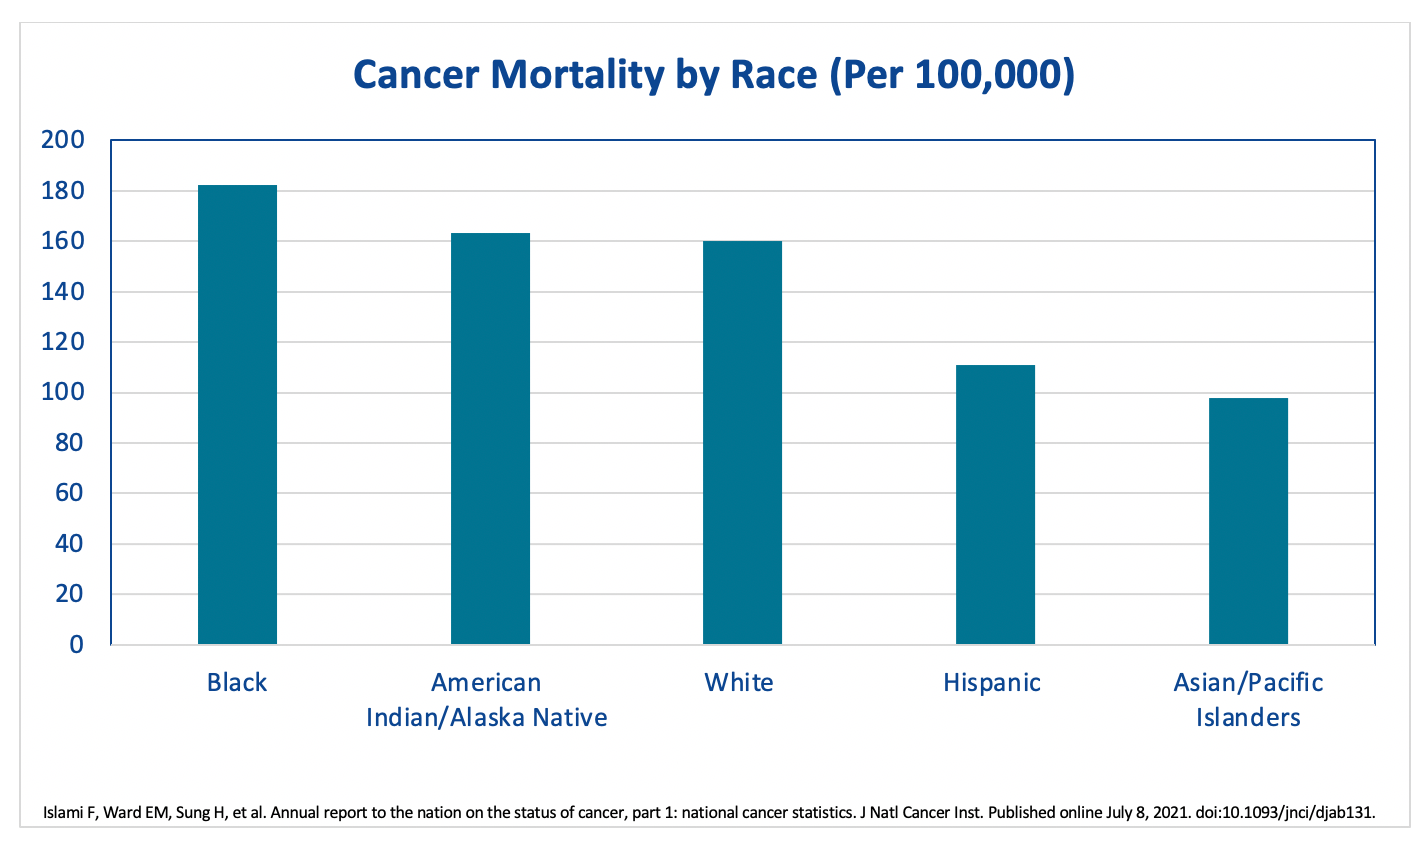 TABLE: Cancer Mortality by Race (Per 100,000)